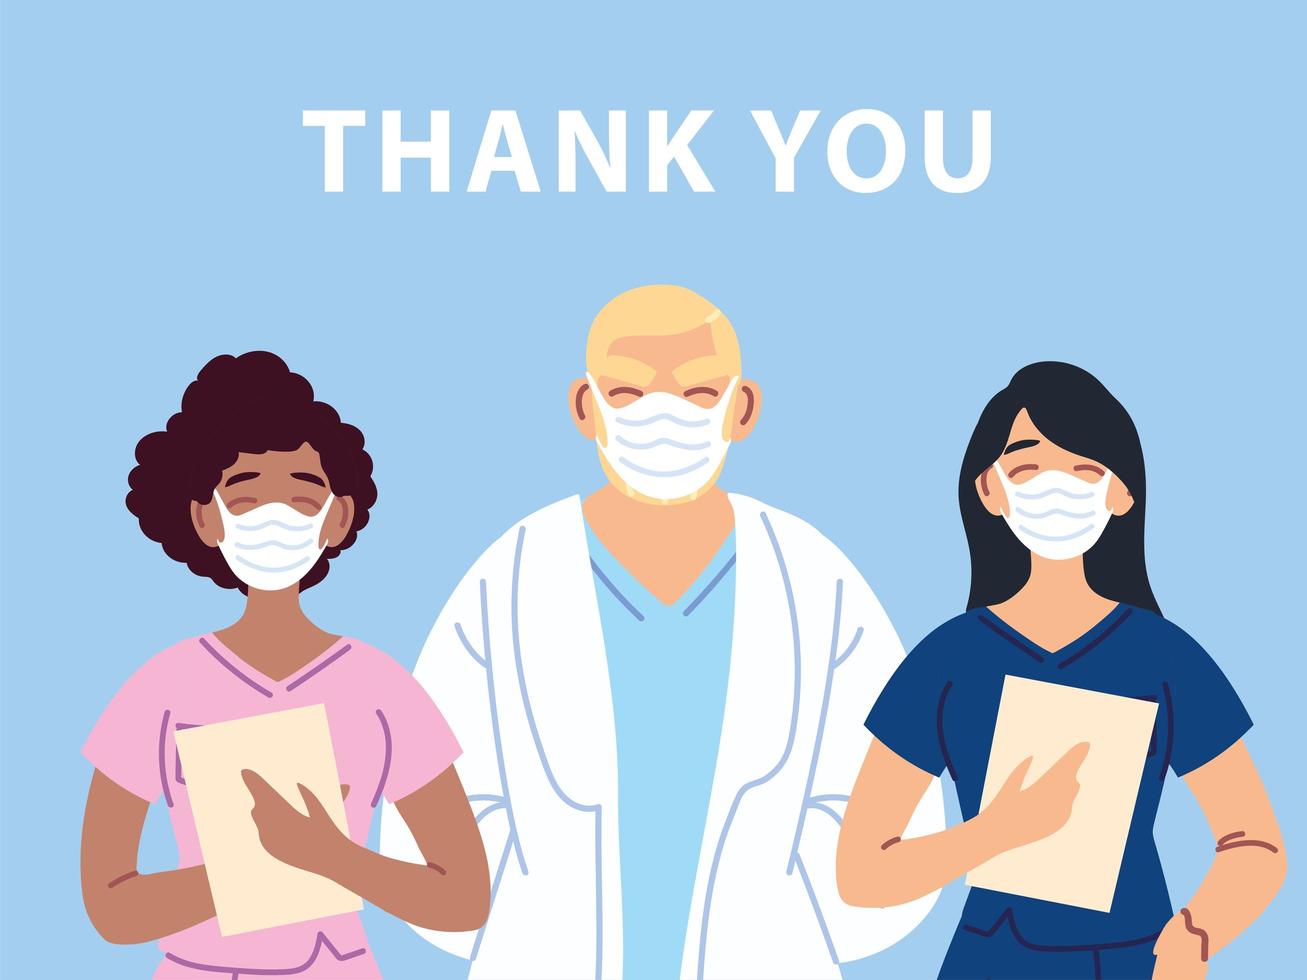 Thank you doctor and nurses poster design vector